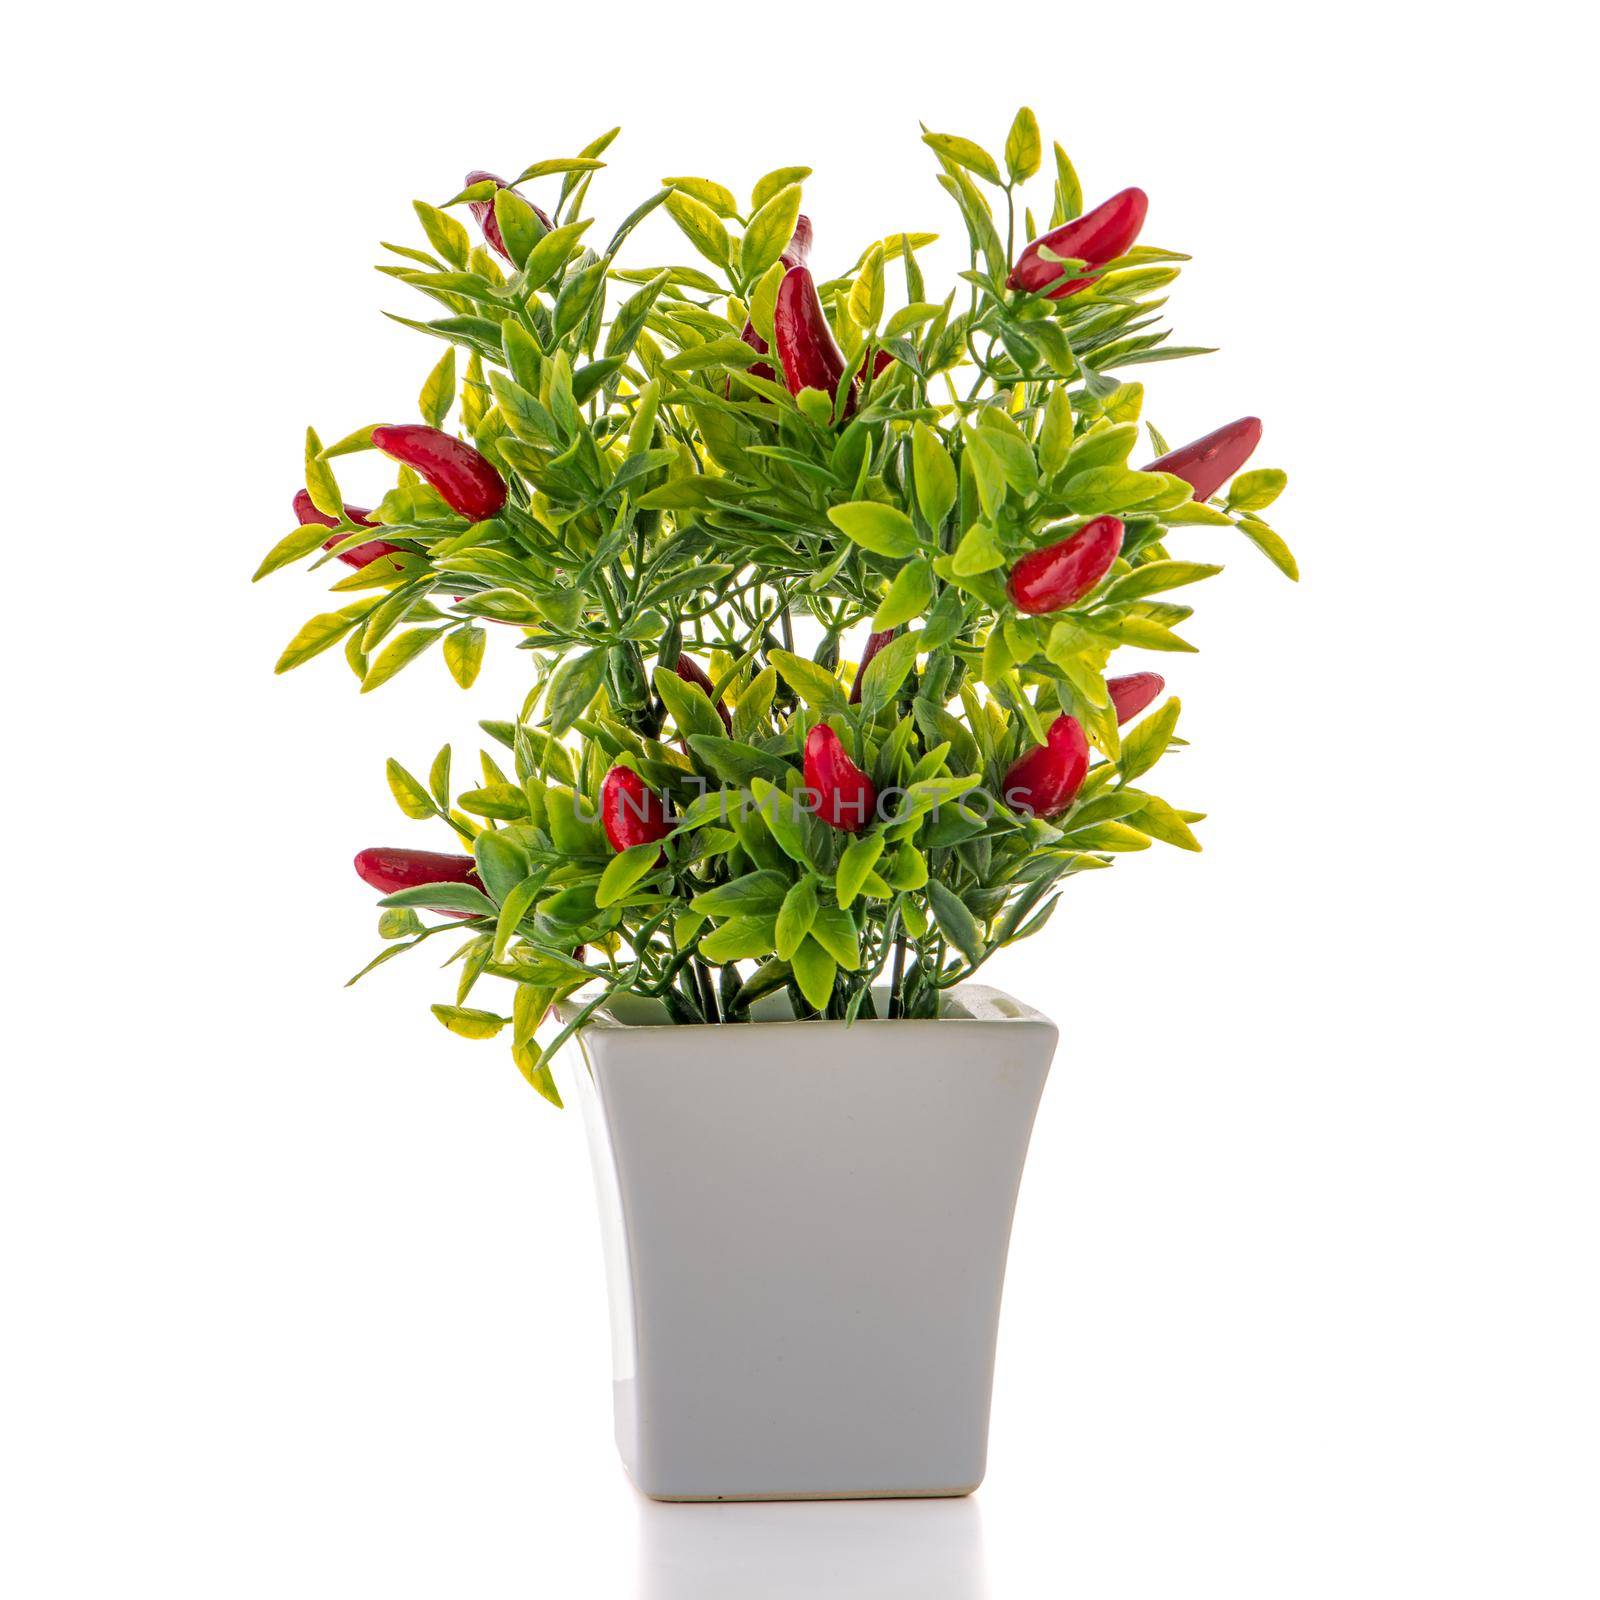 Small decorative chilli pepper plant by homydesign